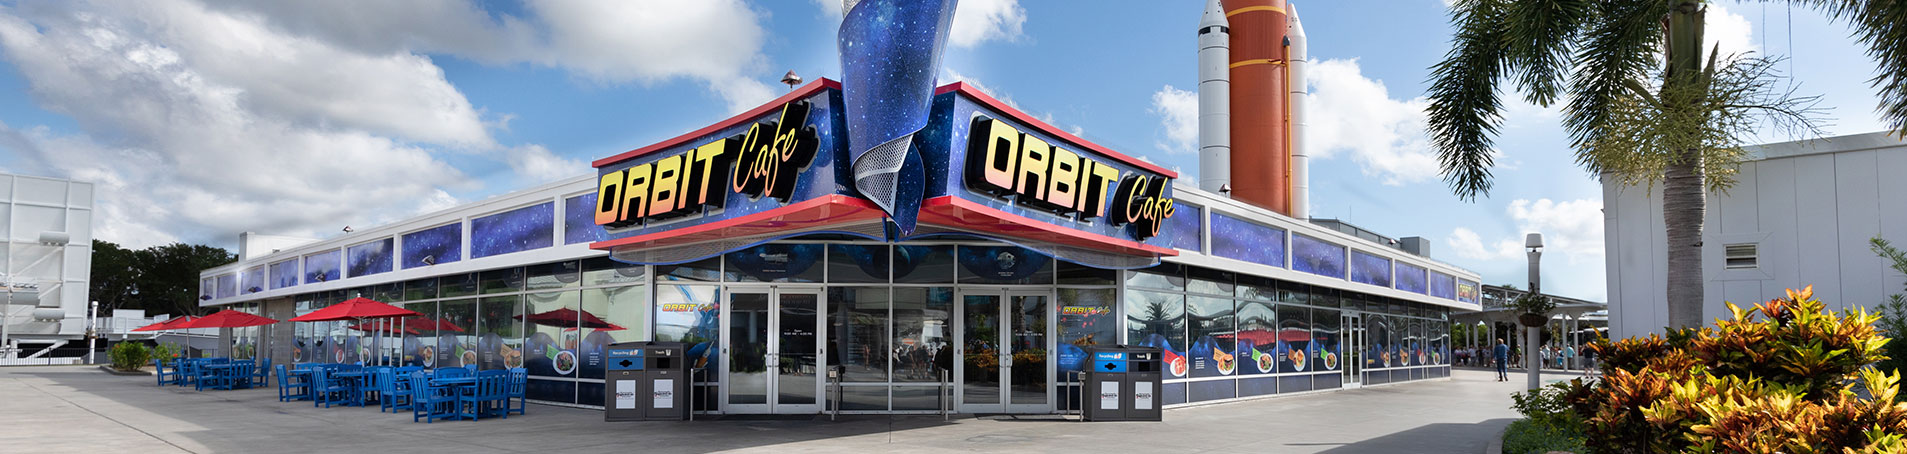 Orbit Cafe at Kennedy Space Center Visitor Complex